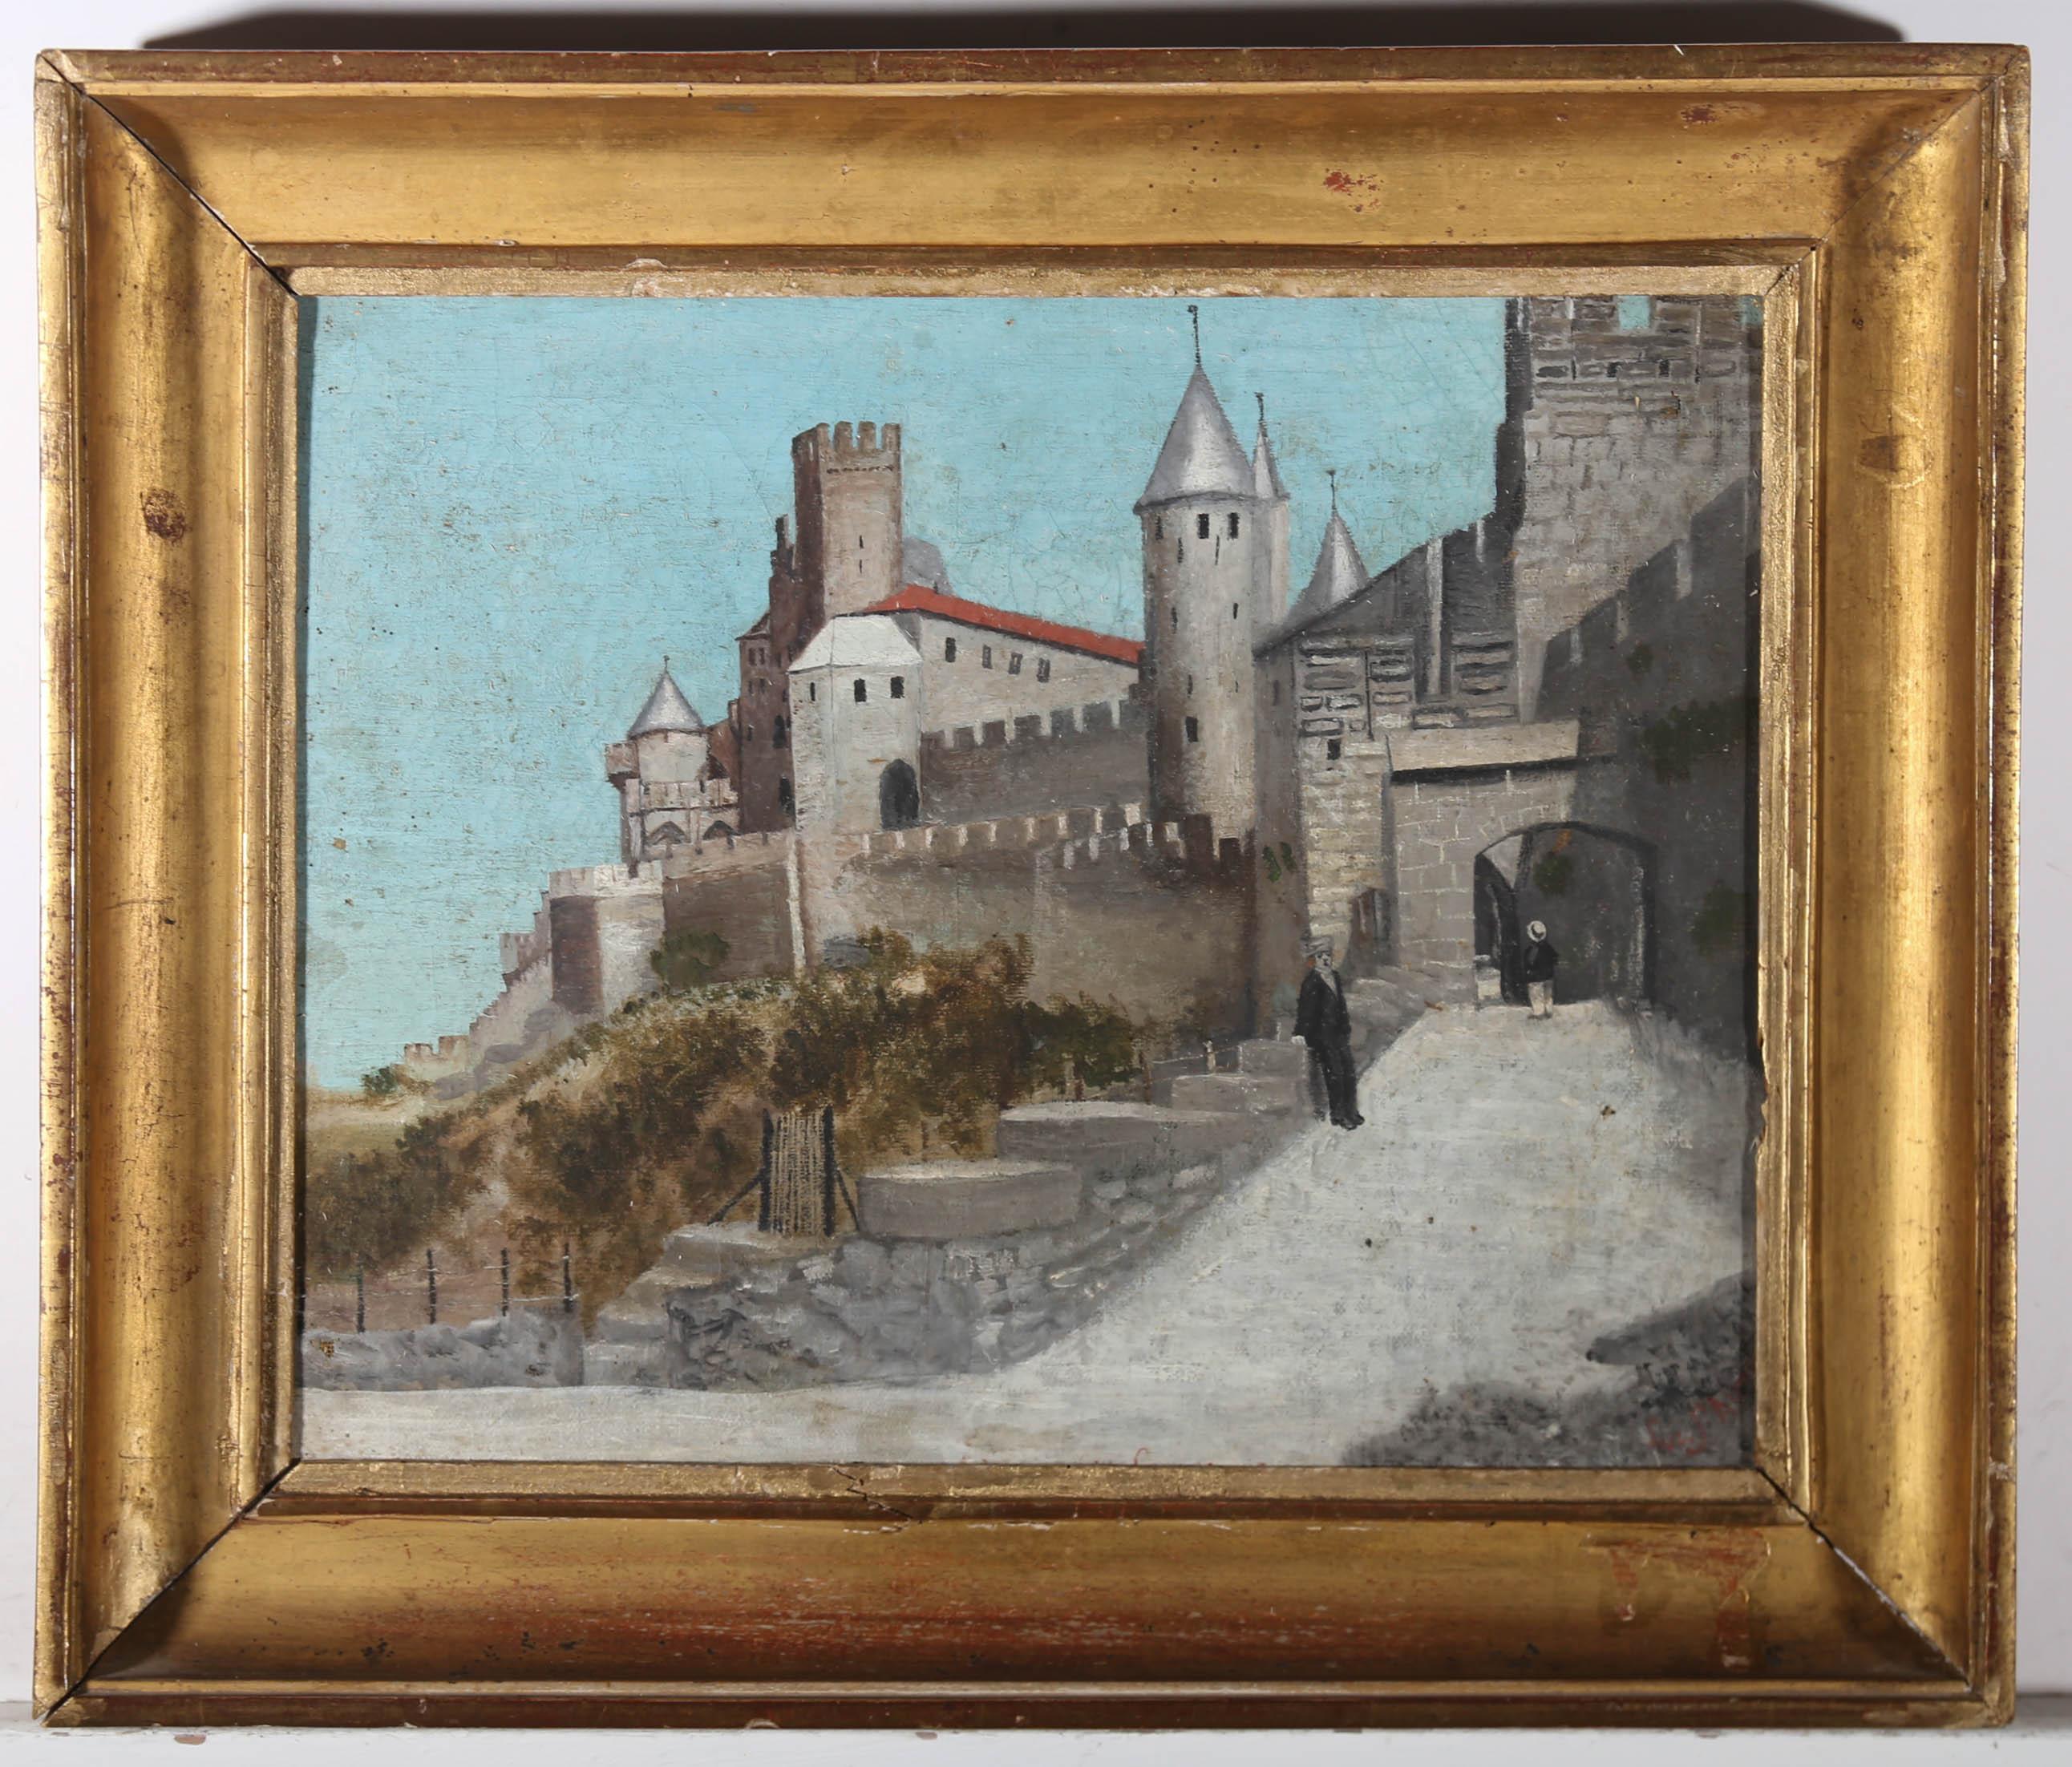 This charming scene depicts the castle Porte de l'Aude in Carcassonne, France. The artist captures the scene in a naïve style, showing figures wondering the castle paths in the foreground. Inscribed with location to the lower edge of the painting,